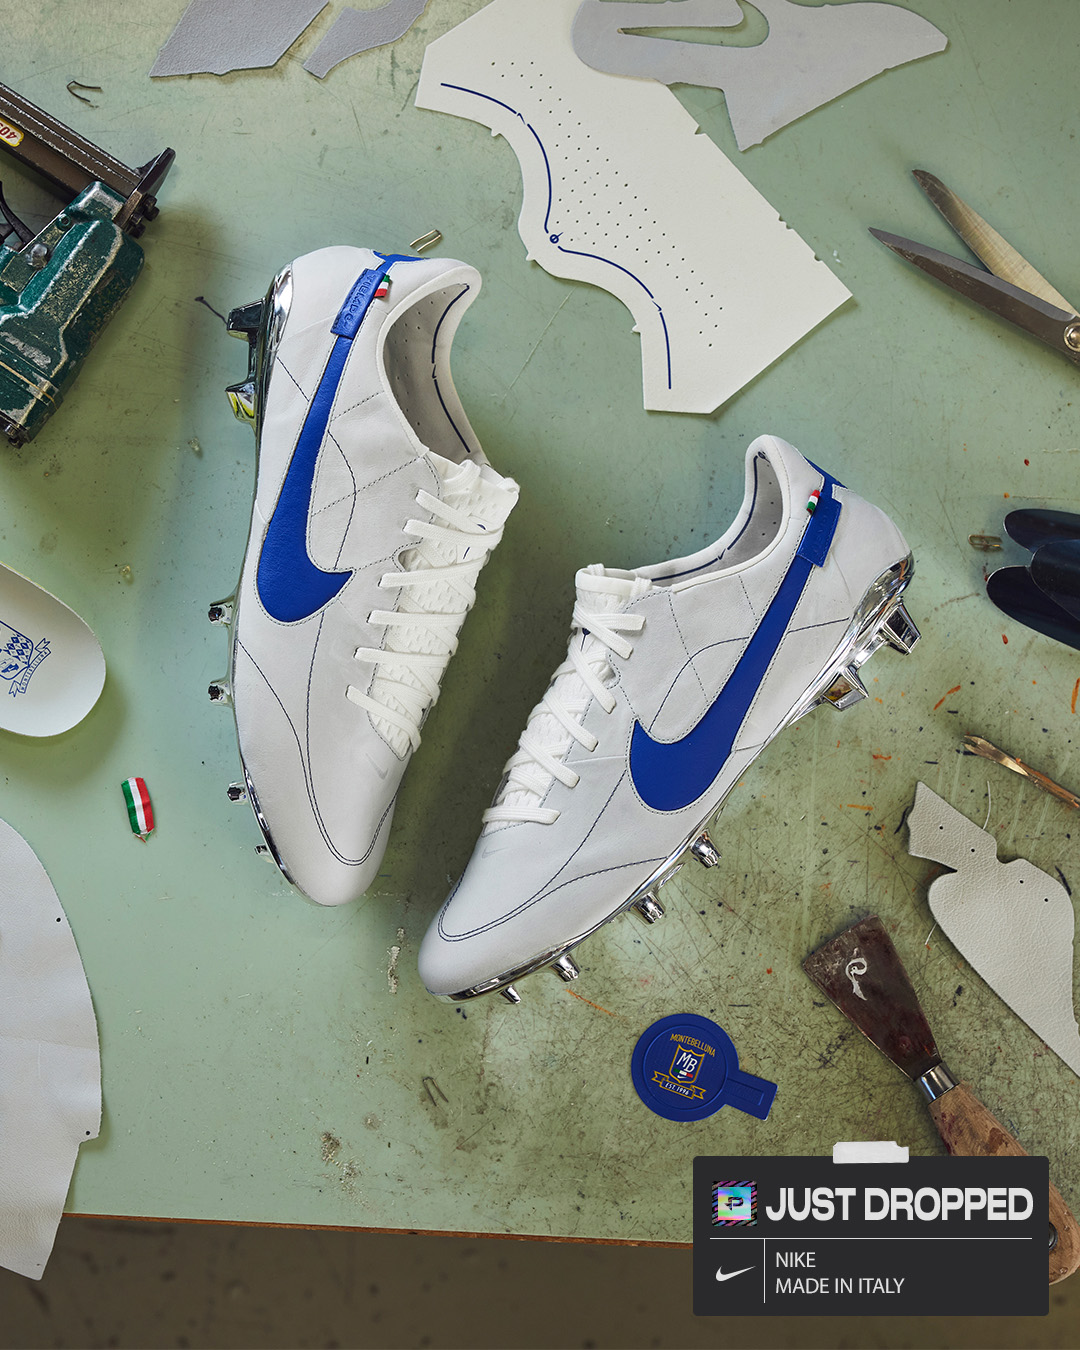 Skubbe sollys pust Pro:Direct Soccer on Twitter: "JUST DROPPED 🔥 https://t.co/EwxBzeBUp5 The Nike  Tiempo Legend IX Made In Italy special edition boot is available now at Pro:Direct  Soccer 🛒 https://t.co/VIeb0JCXt5" / Twitter